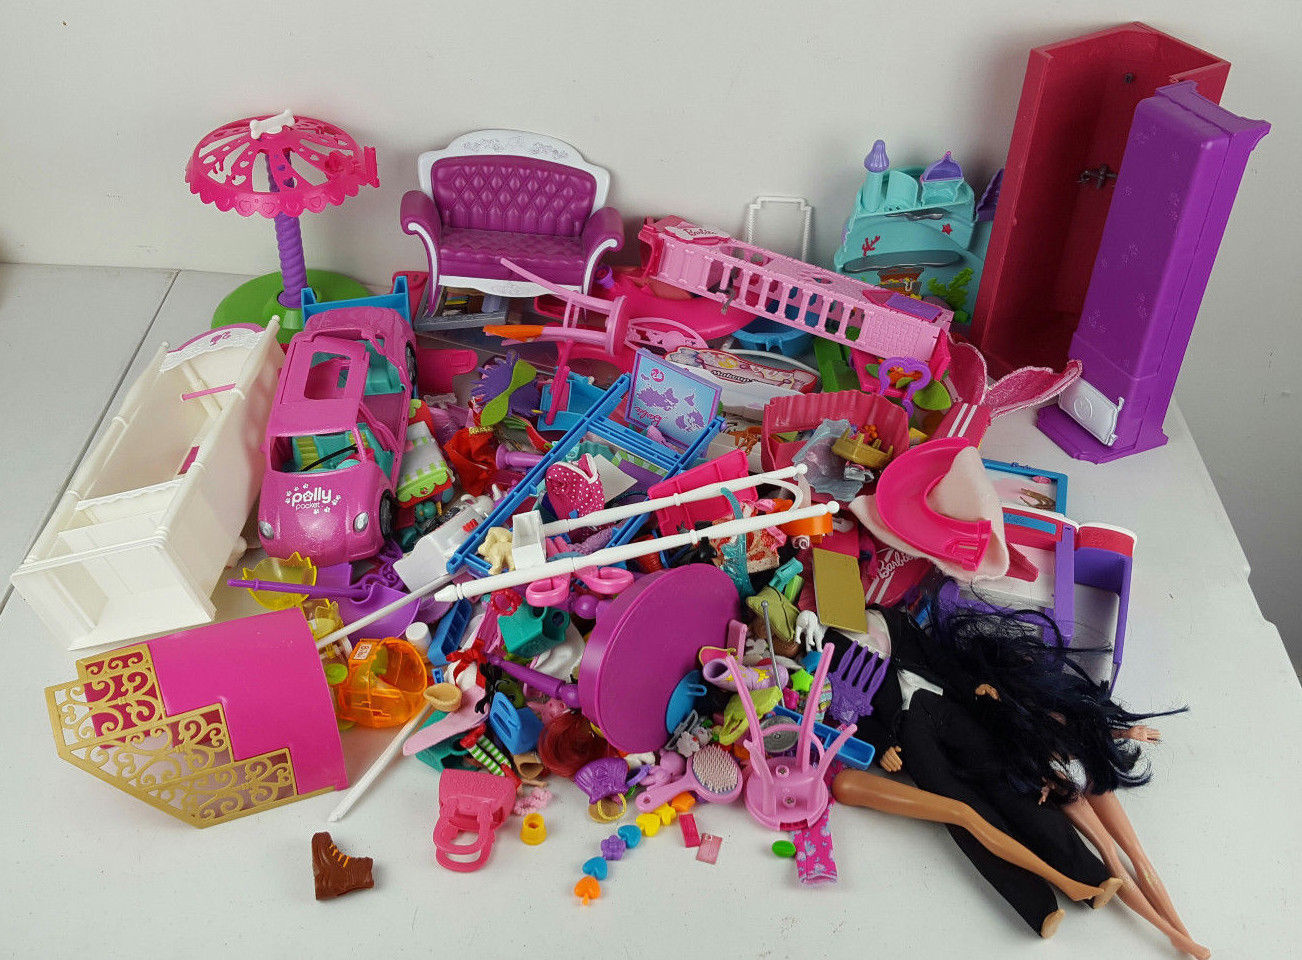 Huge Mixed Lot of Polly Pocket and Barbie Clothes Figures Food Set Pieces Unsort - $49.20